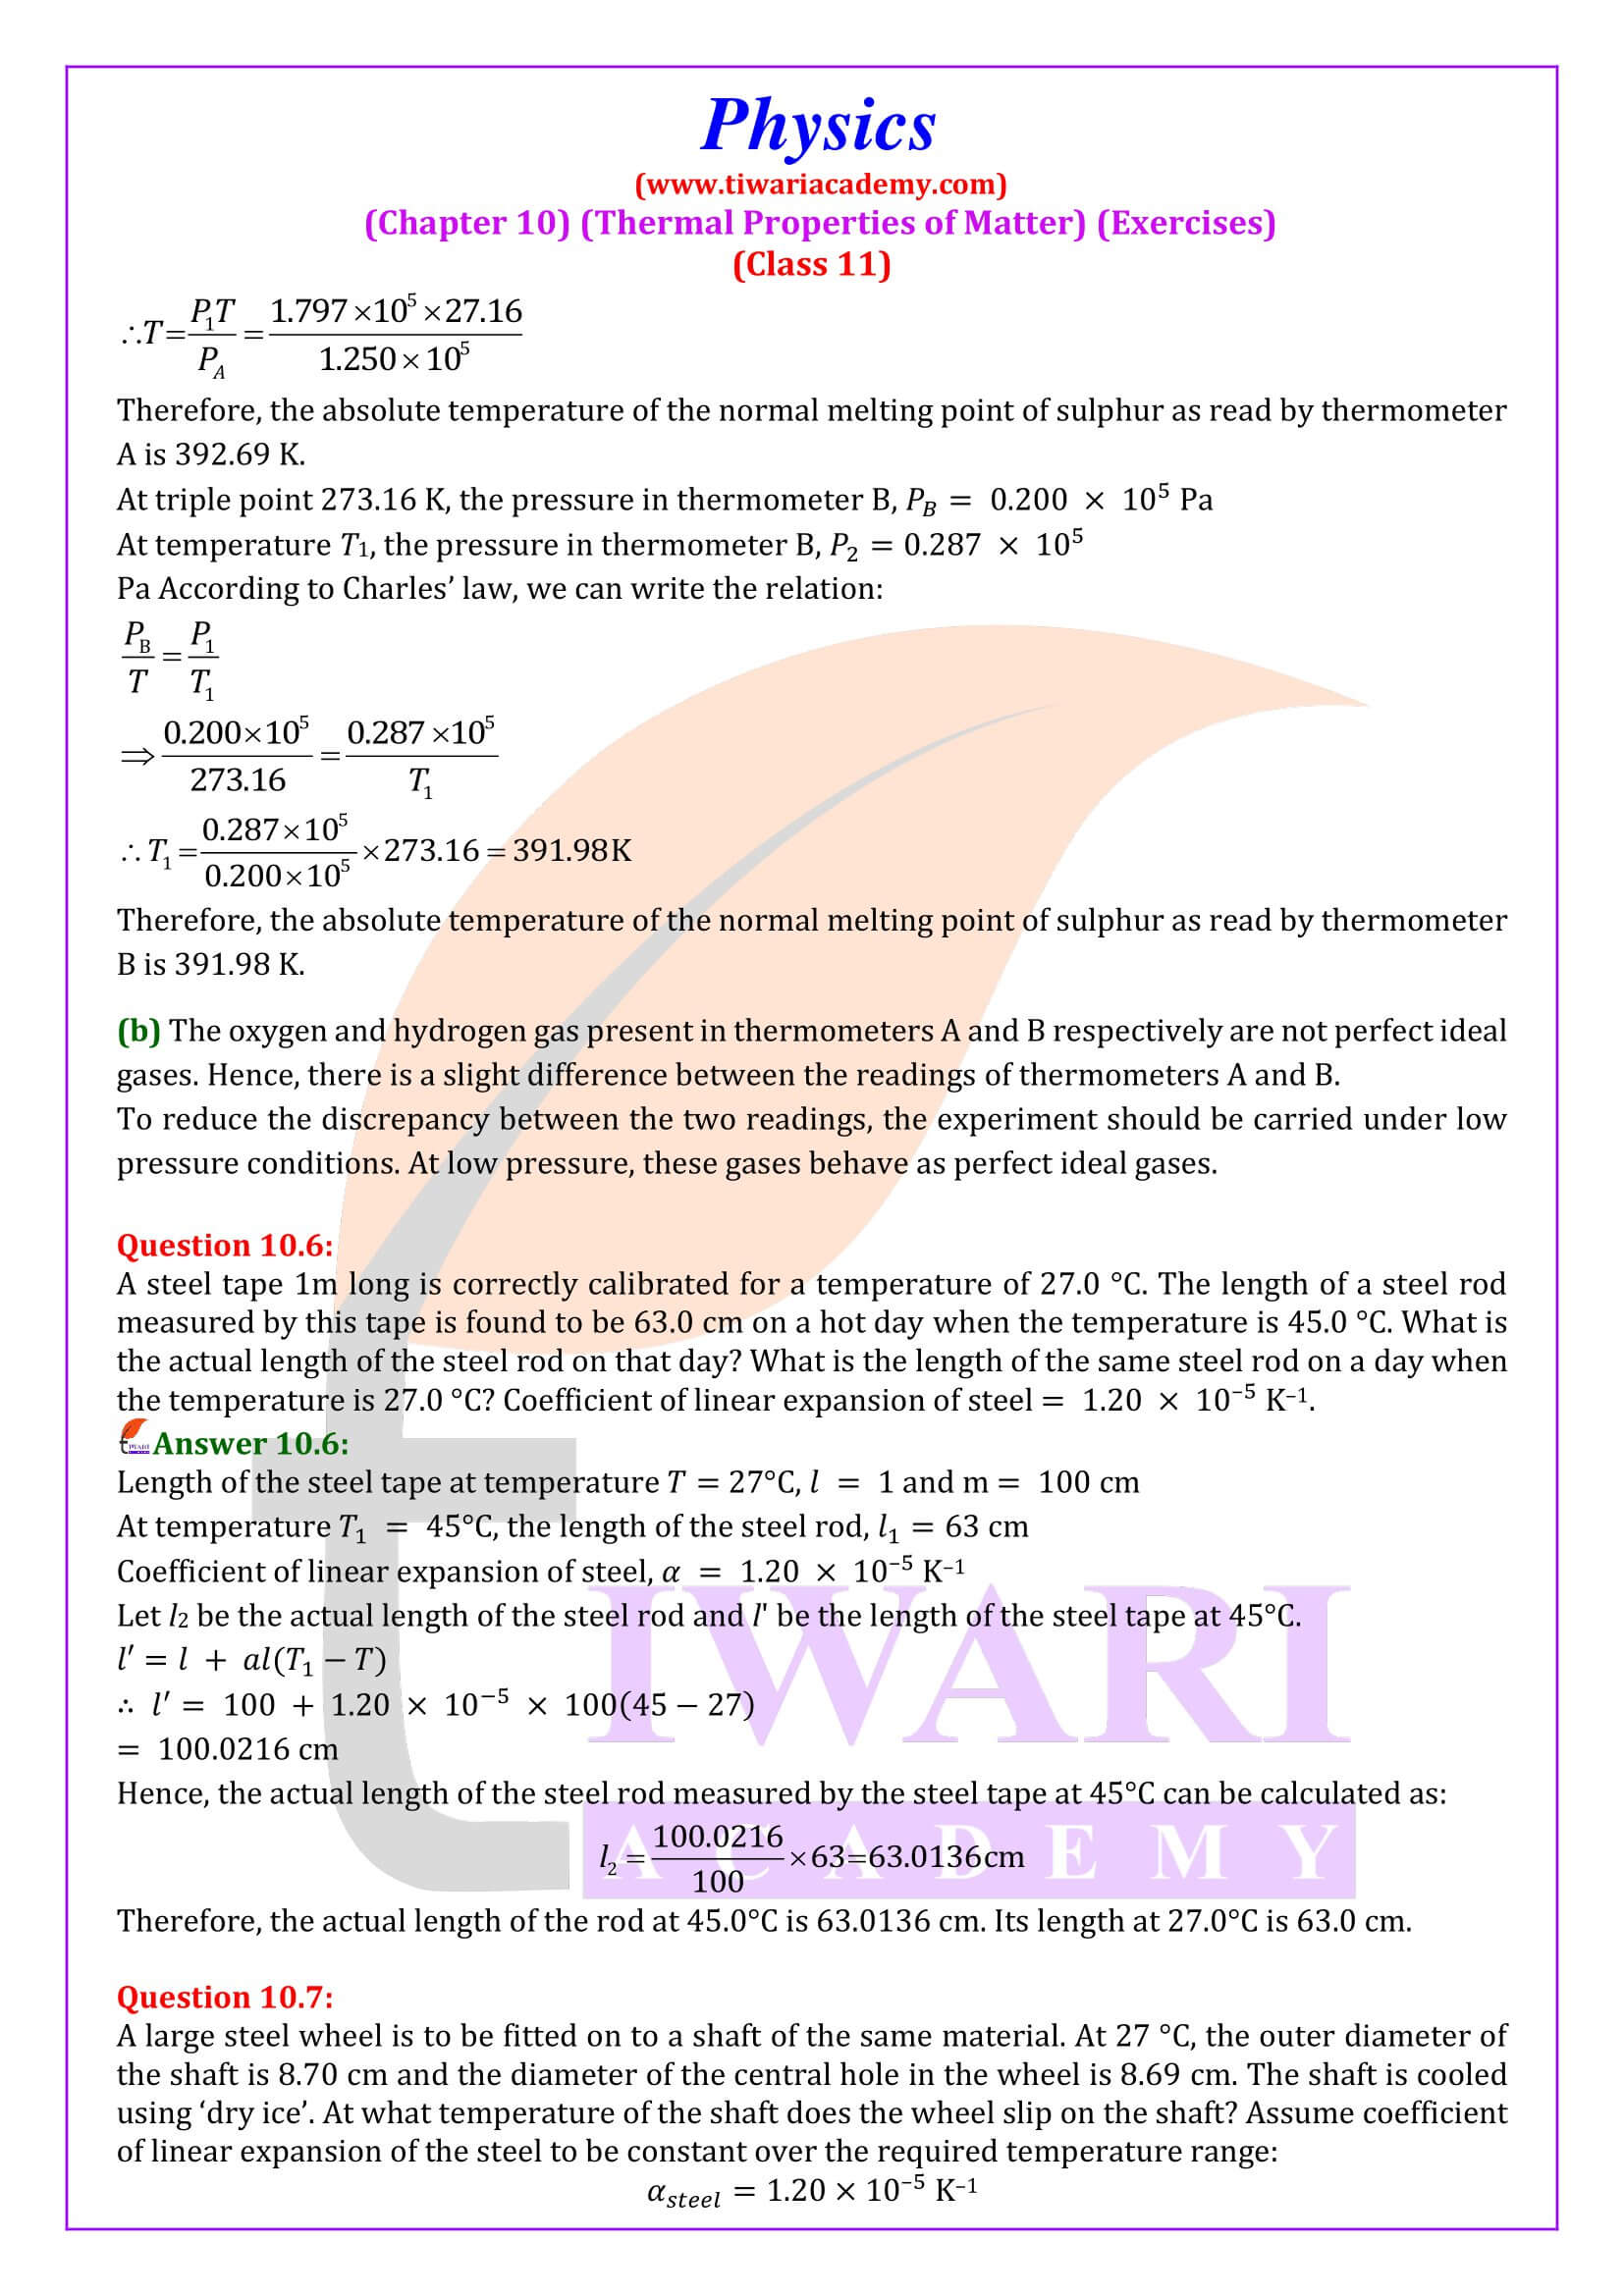 NCERT Solutions for Class 11 Physics Chapter 10 Exercises